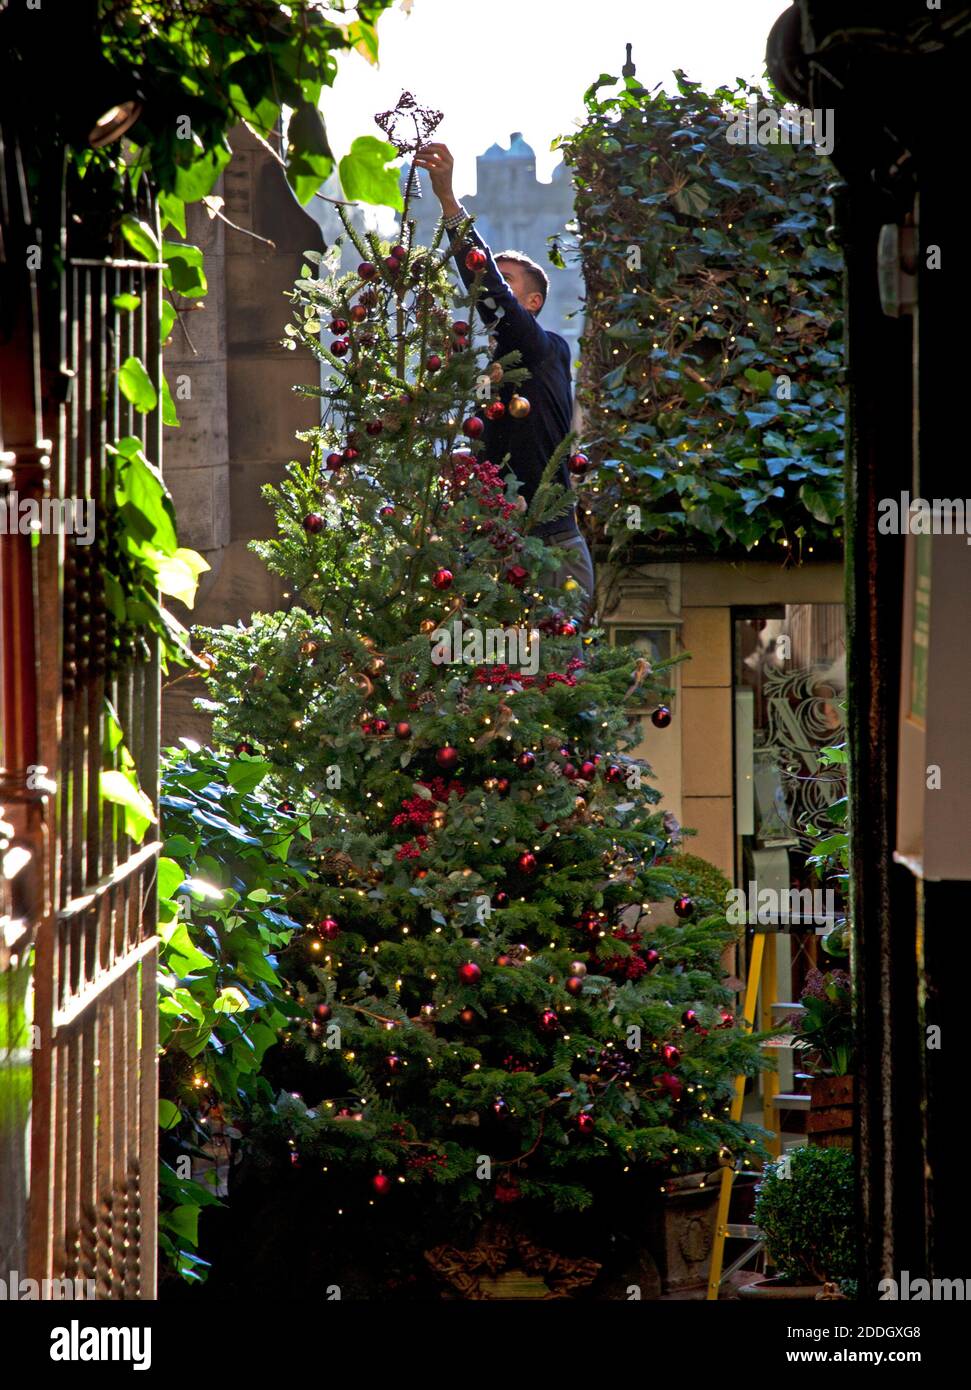 Edinburgh city centre, Scotland, UK. 25 November 2020. Sunny and cool temperature of 7 degrees in the city centre beginning to feel a little more festive with seasonal decorations being put in place. Pictured: Steven manager of the Witchery restaurant finishing decorating the Christmas Tree by placing a star on top at the entrance to the famous restaurant. Credit: Arch White/ Alamy Live News. Stock Photo